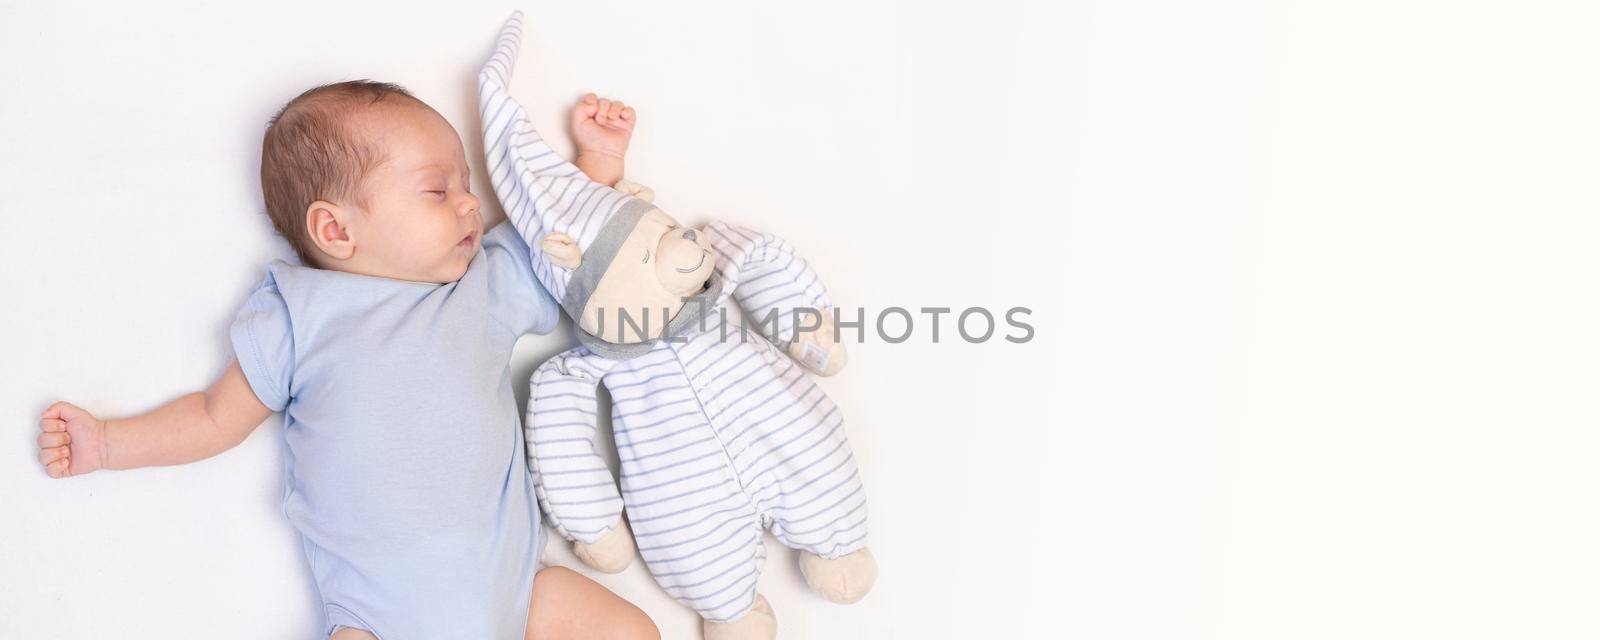 The baby is lying in a crib with a teddy bear . The baby is 0-3 months old. A calm sleeping baby. Healthy baby sleep. An article about toys for kids. A soft toy. Copy space banner